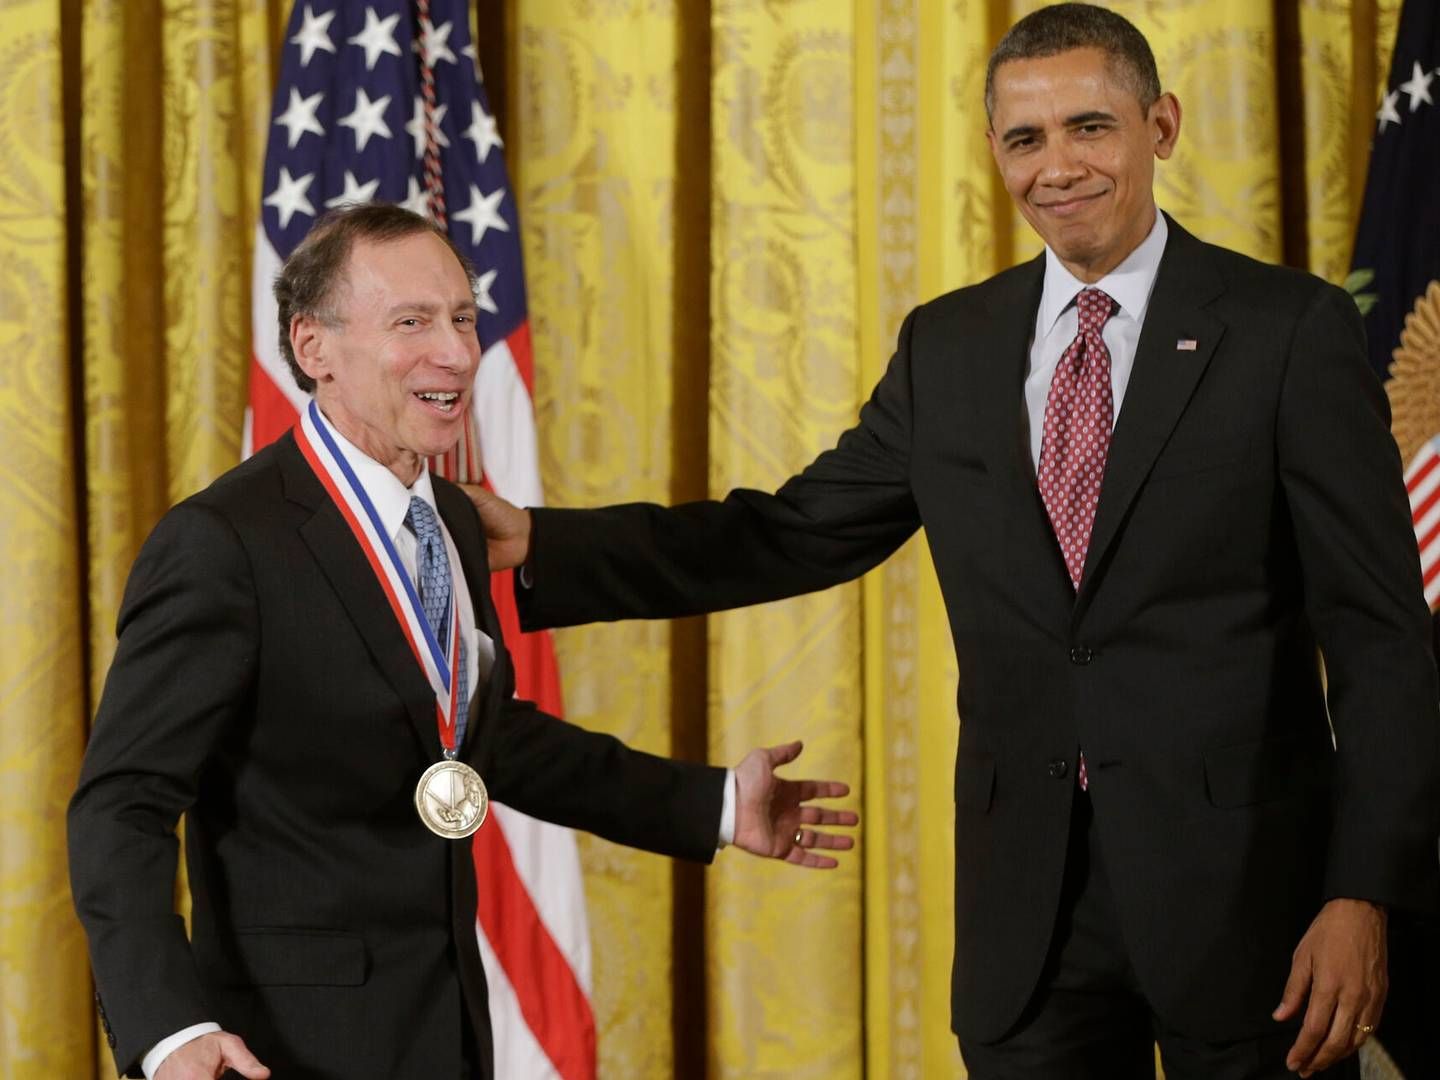 Robert Langer has received several honorary awards in his career. Here, he is pictured in 2013, when then US President Barack Obama presented him with the National Medal of Technology and Innovation. | Foto: Charles Dharapak/AP/Ritzau Scanpix